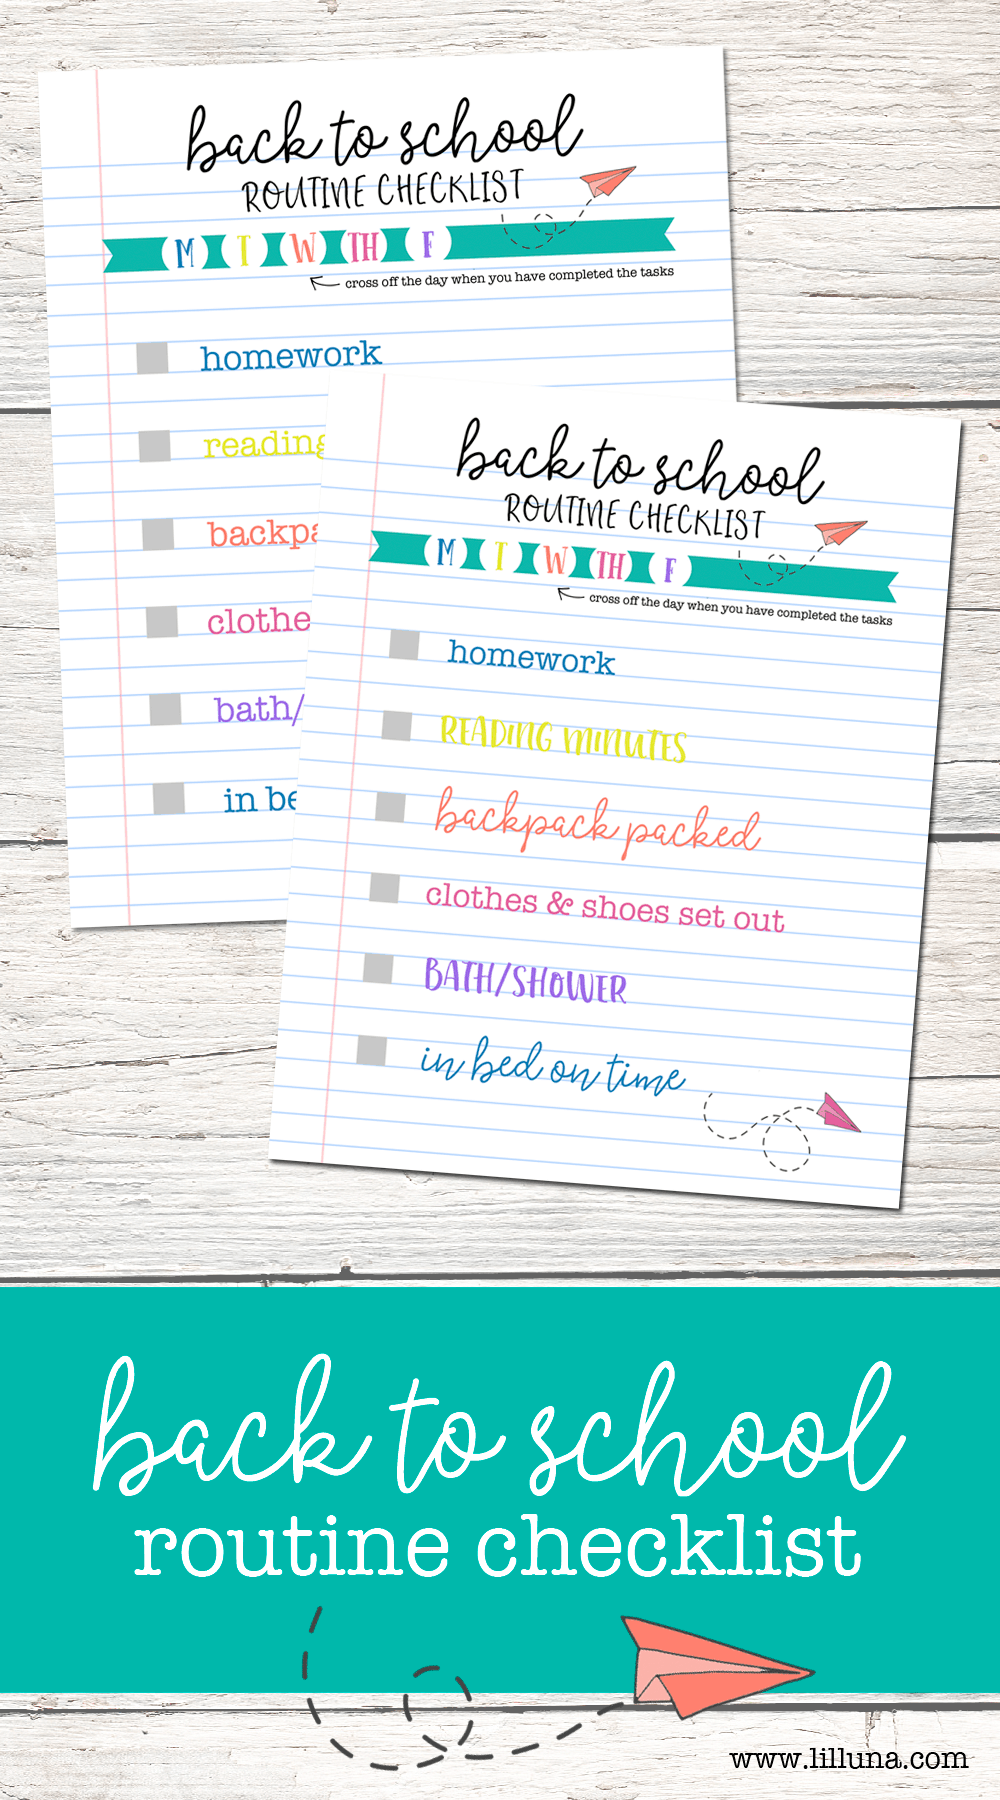 FREE Back 2 School Routine Checklist - help the kids get back in a routine with this free printable.